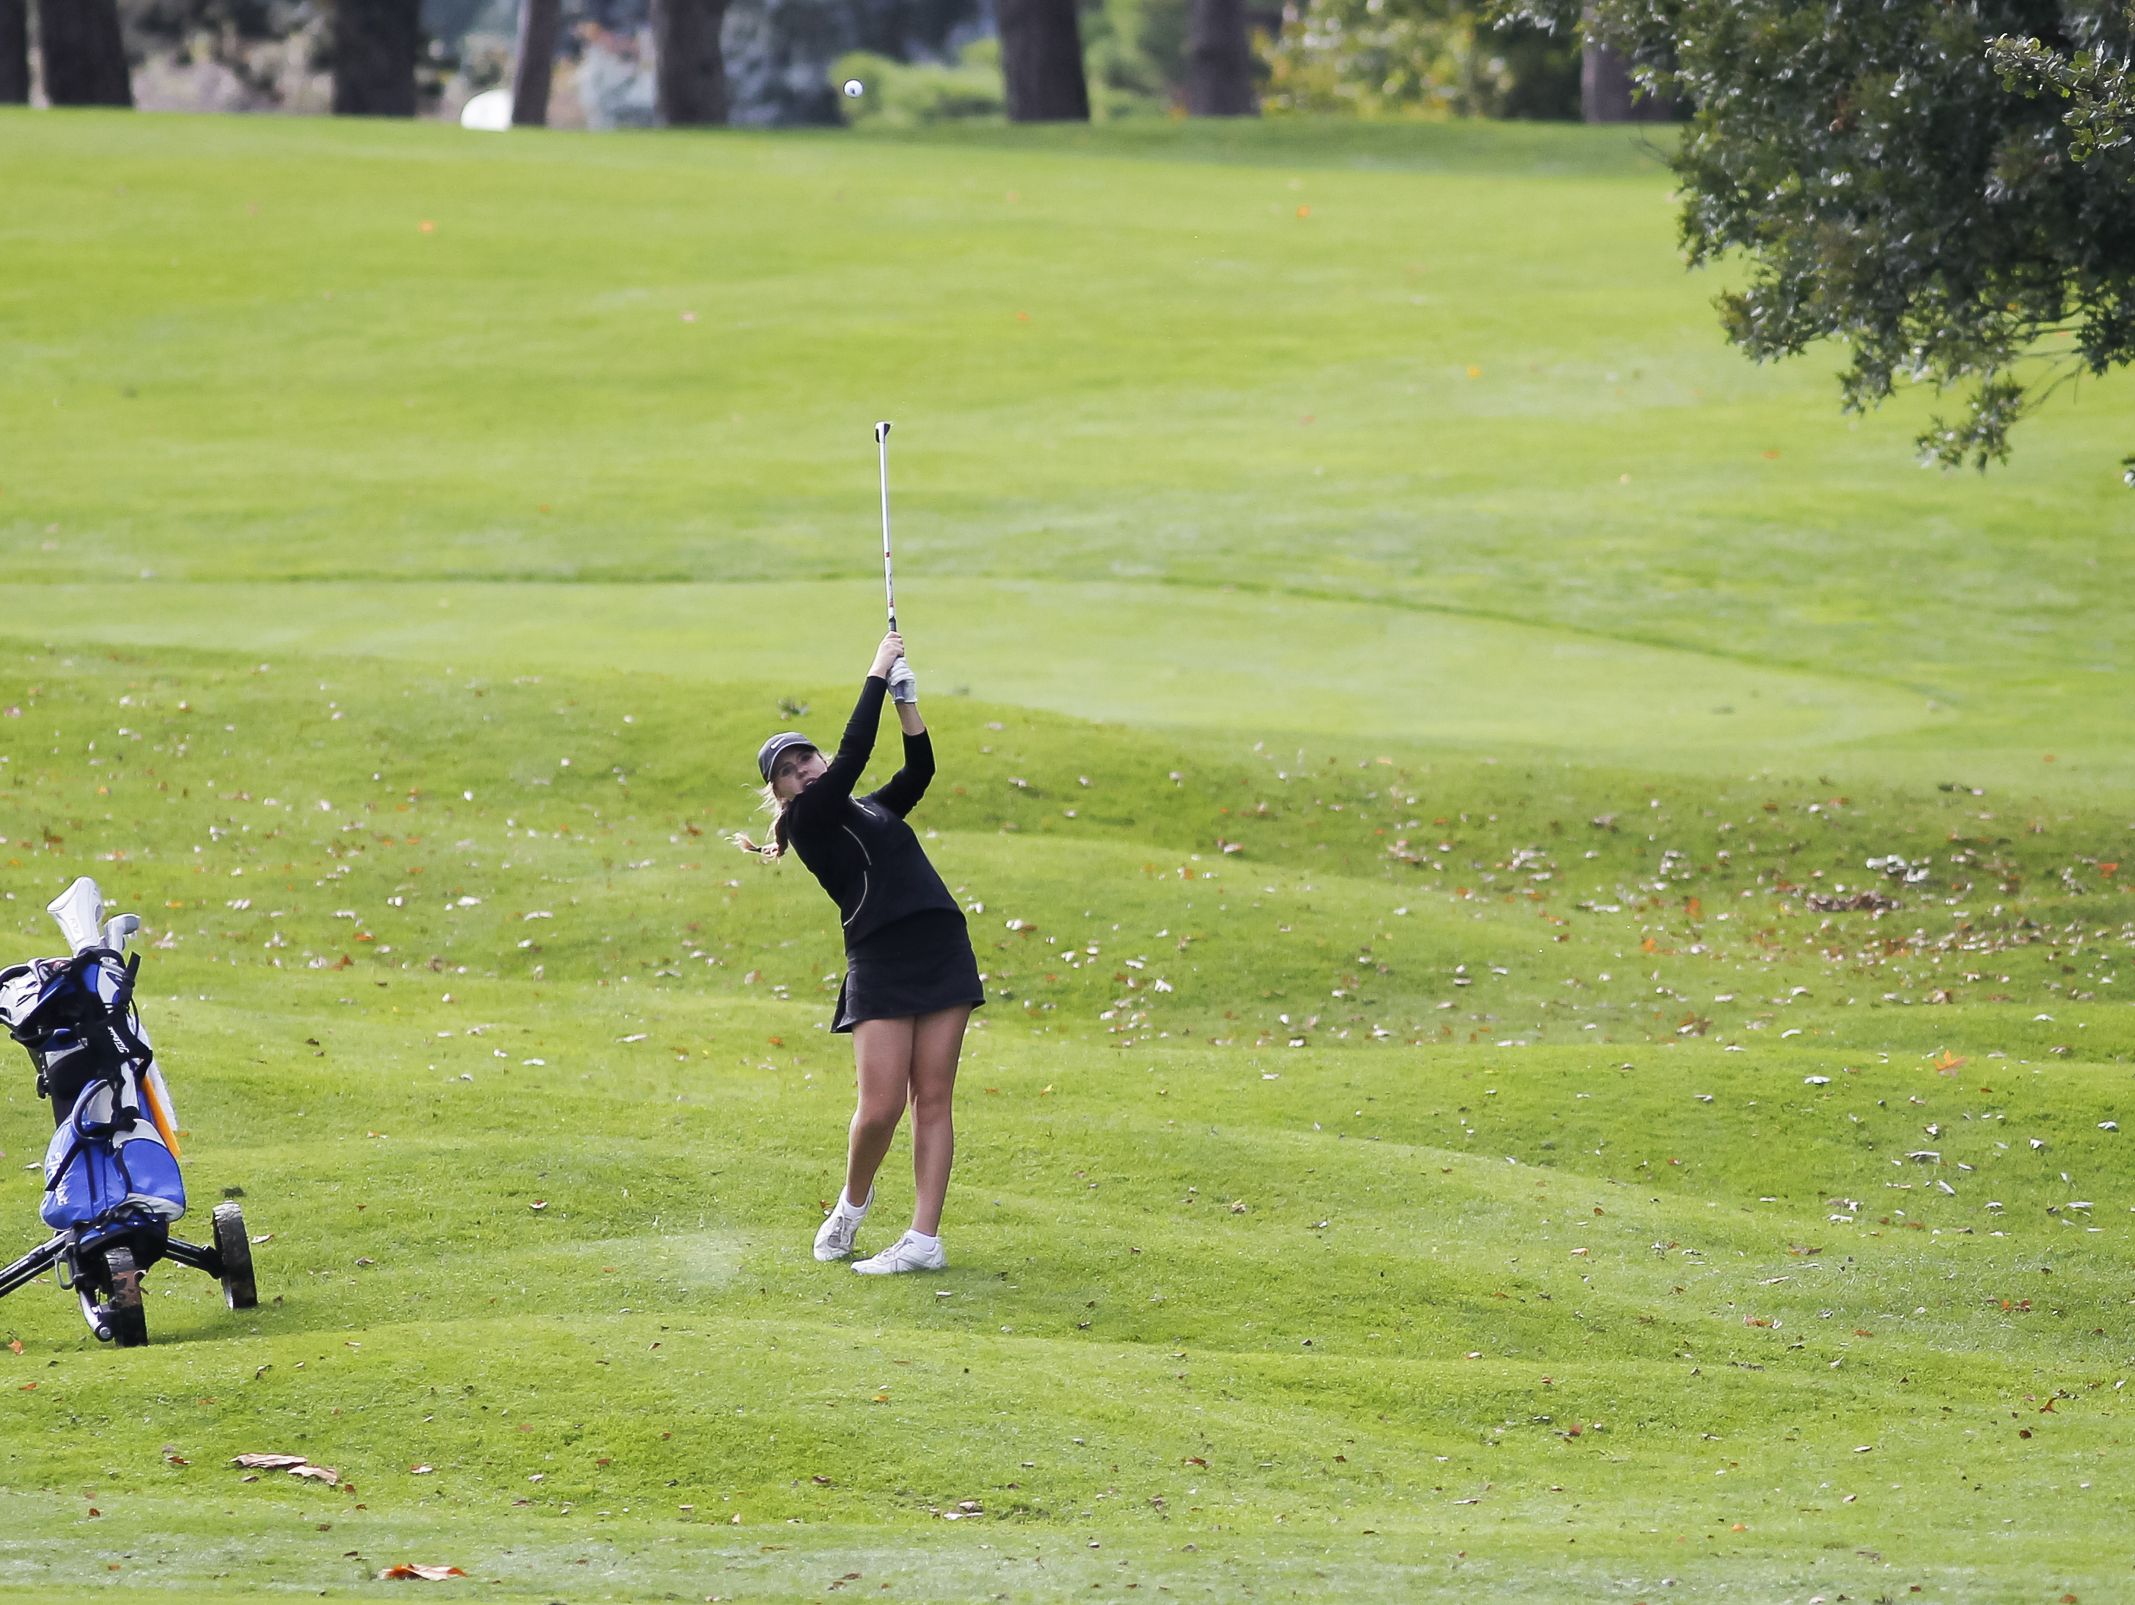 Lansing Catholic freshman Addison Johns works the fifth hole fairway during the Div. 4 Girls Golf Finals October 15, 2016, at Forest Akers West at Michigan State University.